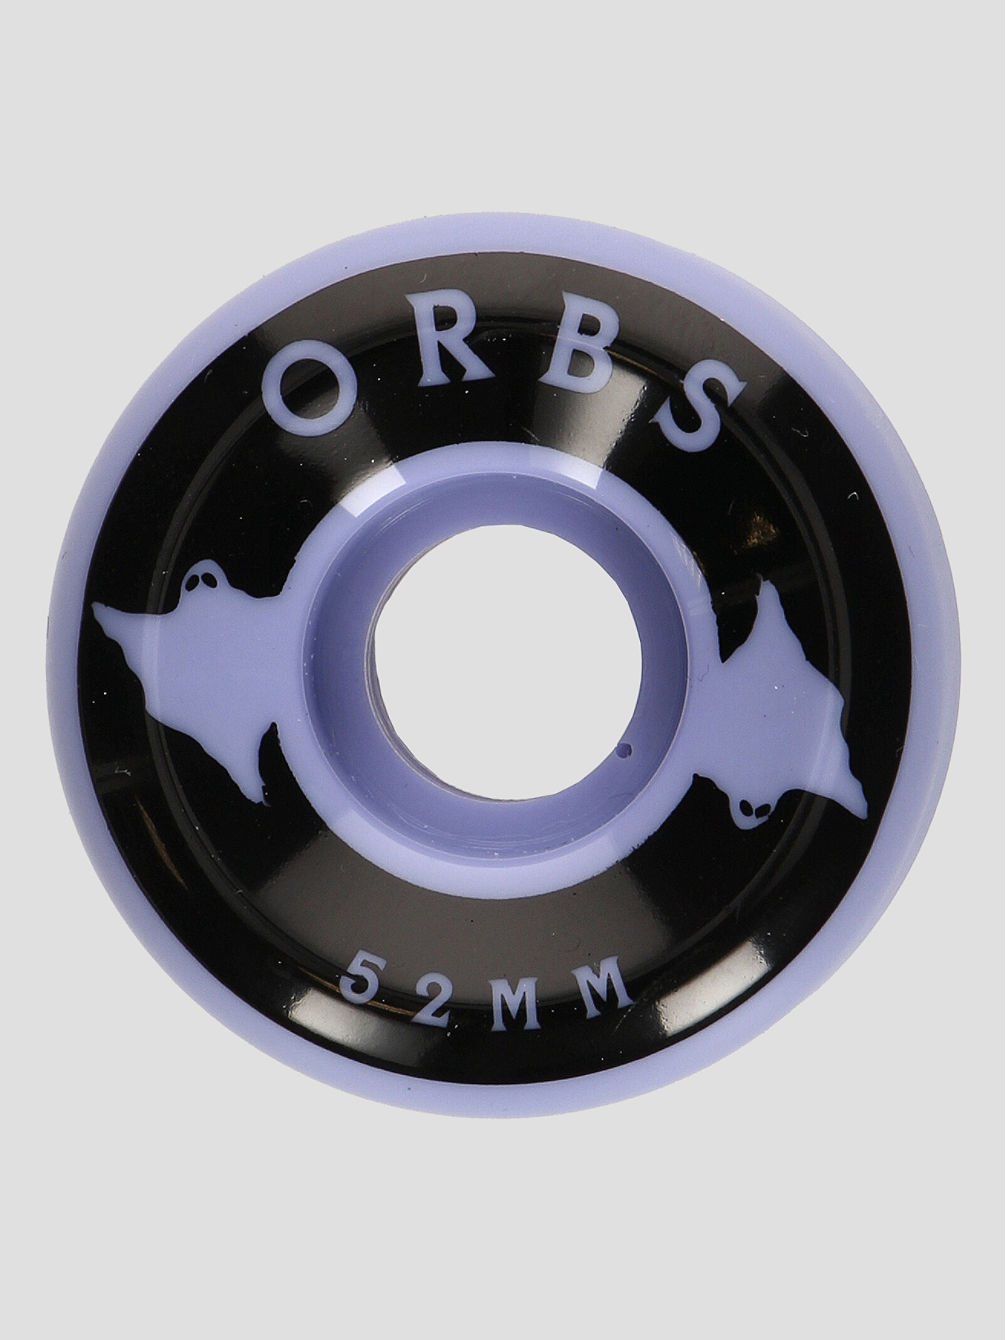 Orbs Specters - Conical - 99A 52mm Roues